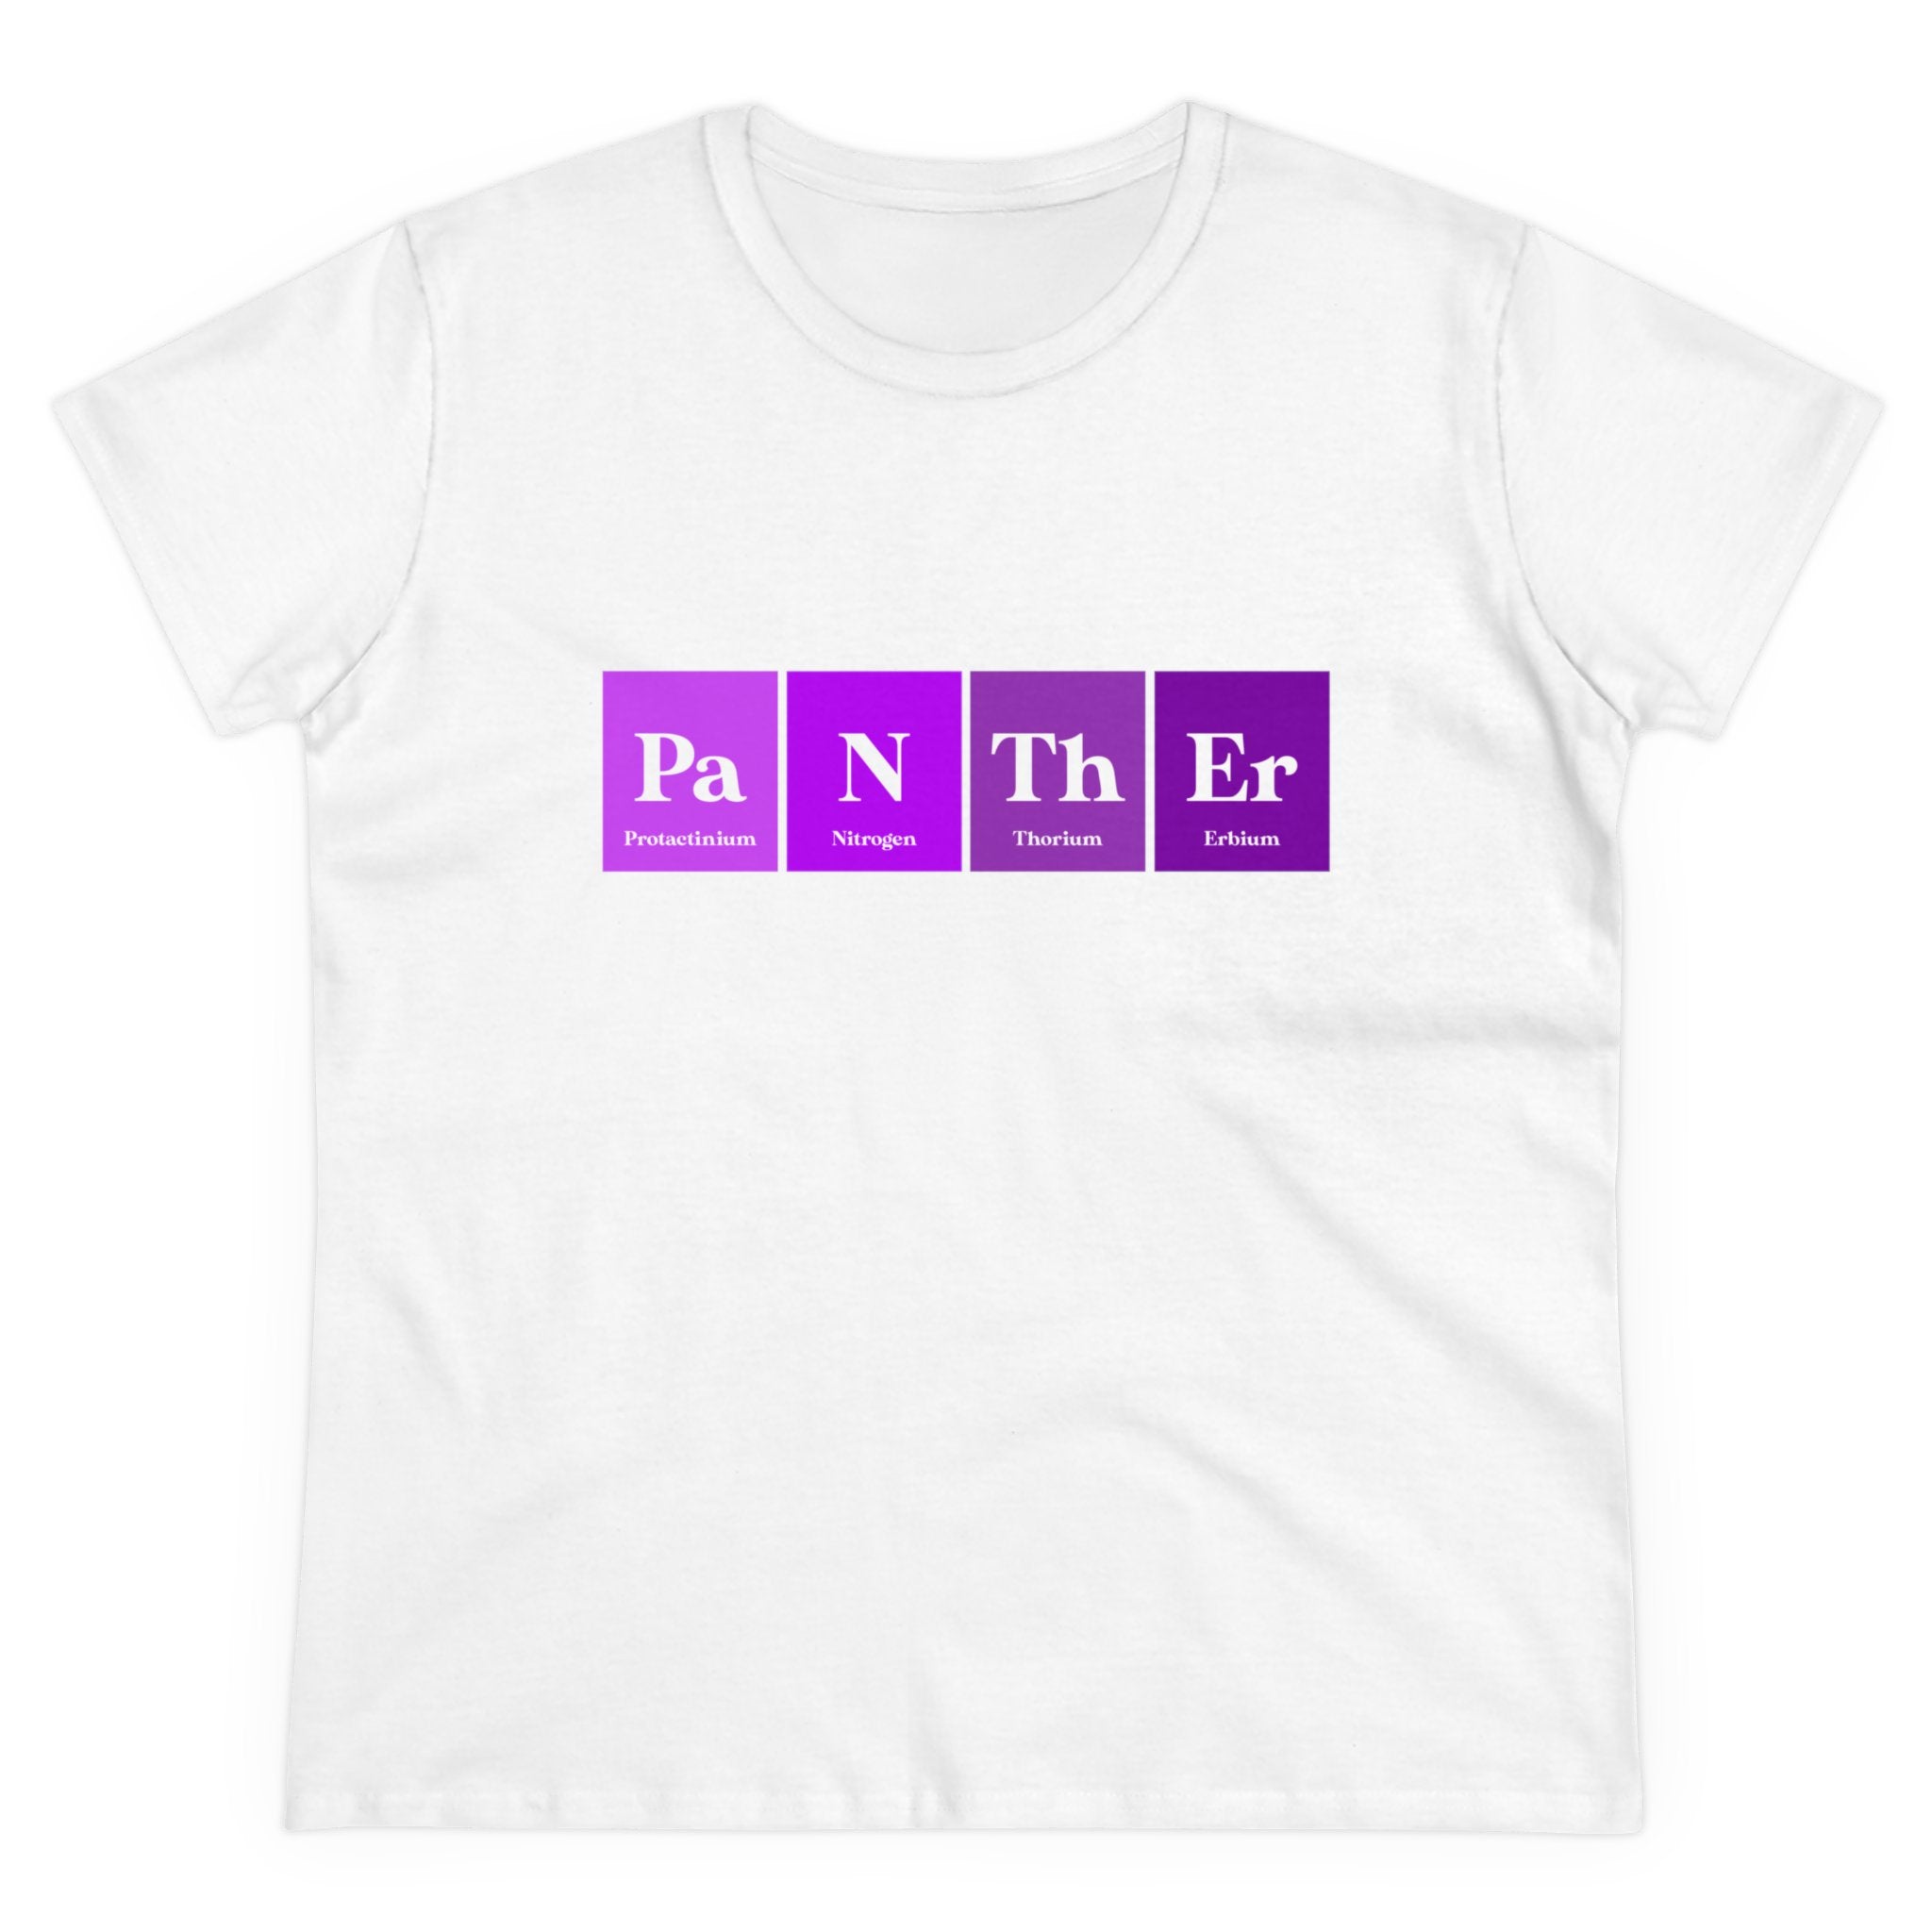 Experience ultimate comfort with this white Pa-N-Th-Er - Women's Tee, featuring a unique design that spells out "Panther" using elements from the periodic table: Protactinium (Pa), Nitrogen (N), Thorium (Th), and Erbium (Er) in stylish shades of purple.